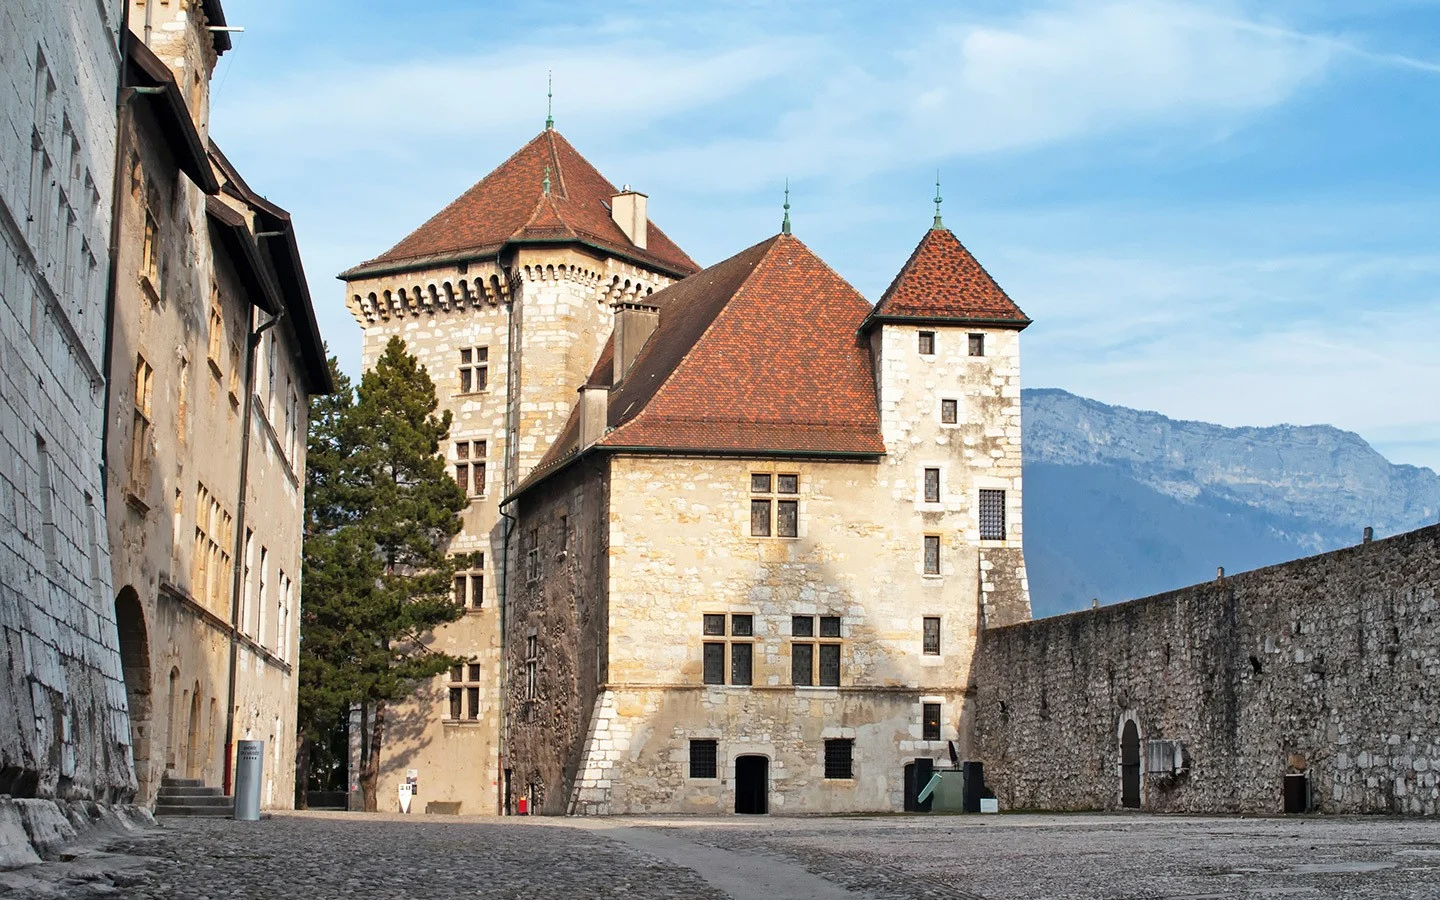 The Château d'Annecy, Annecy Castle in France